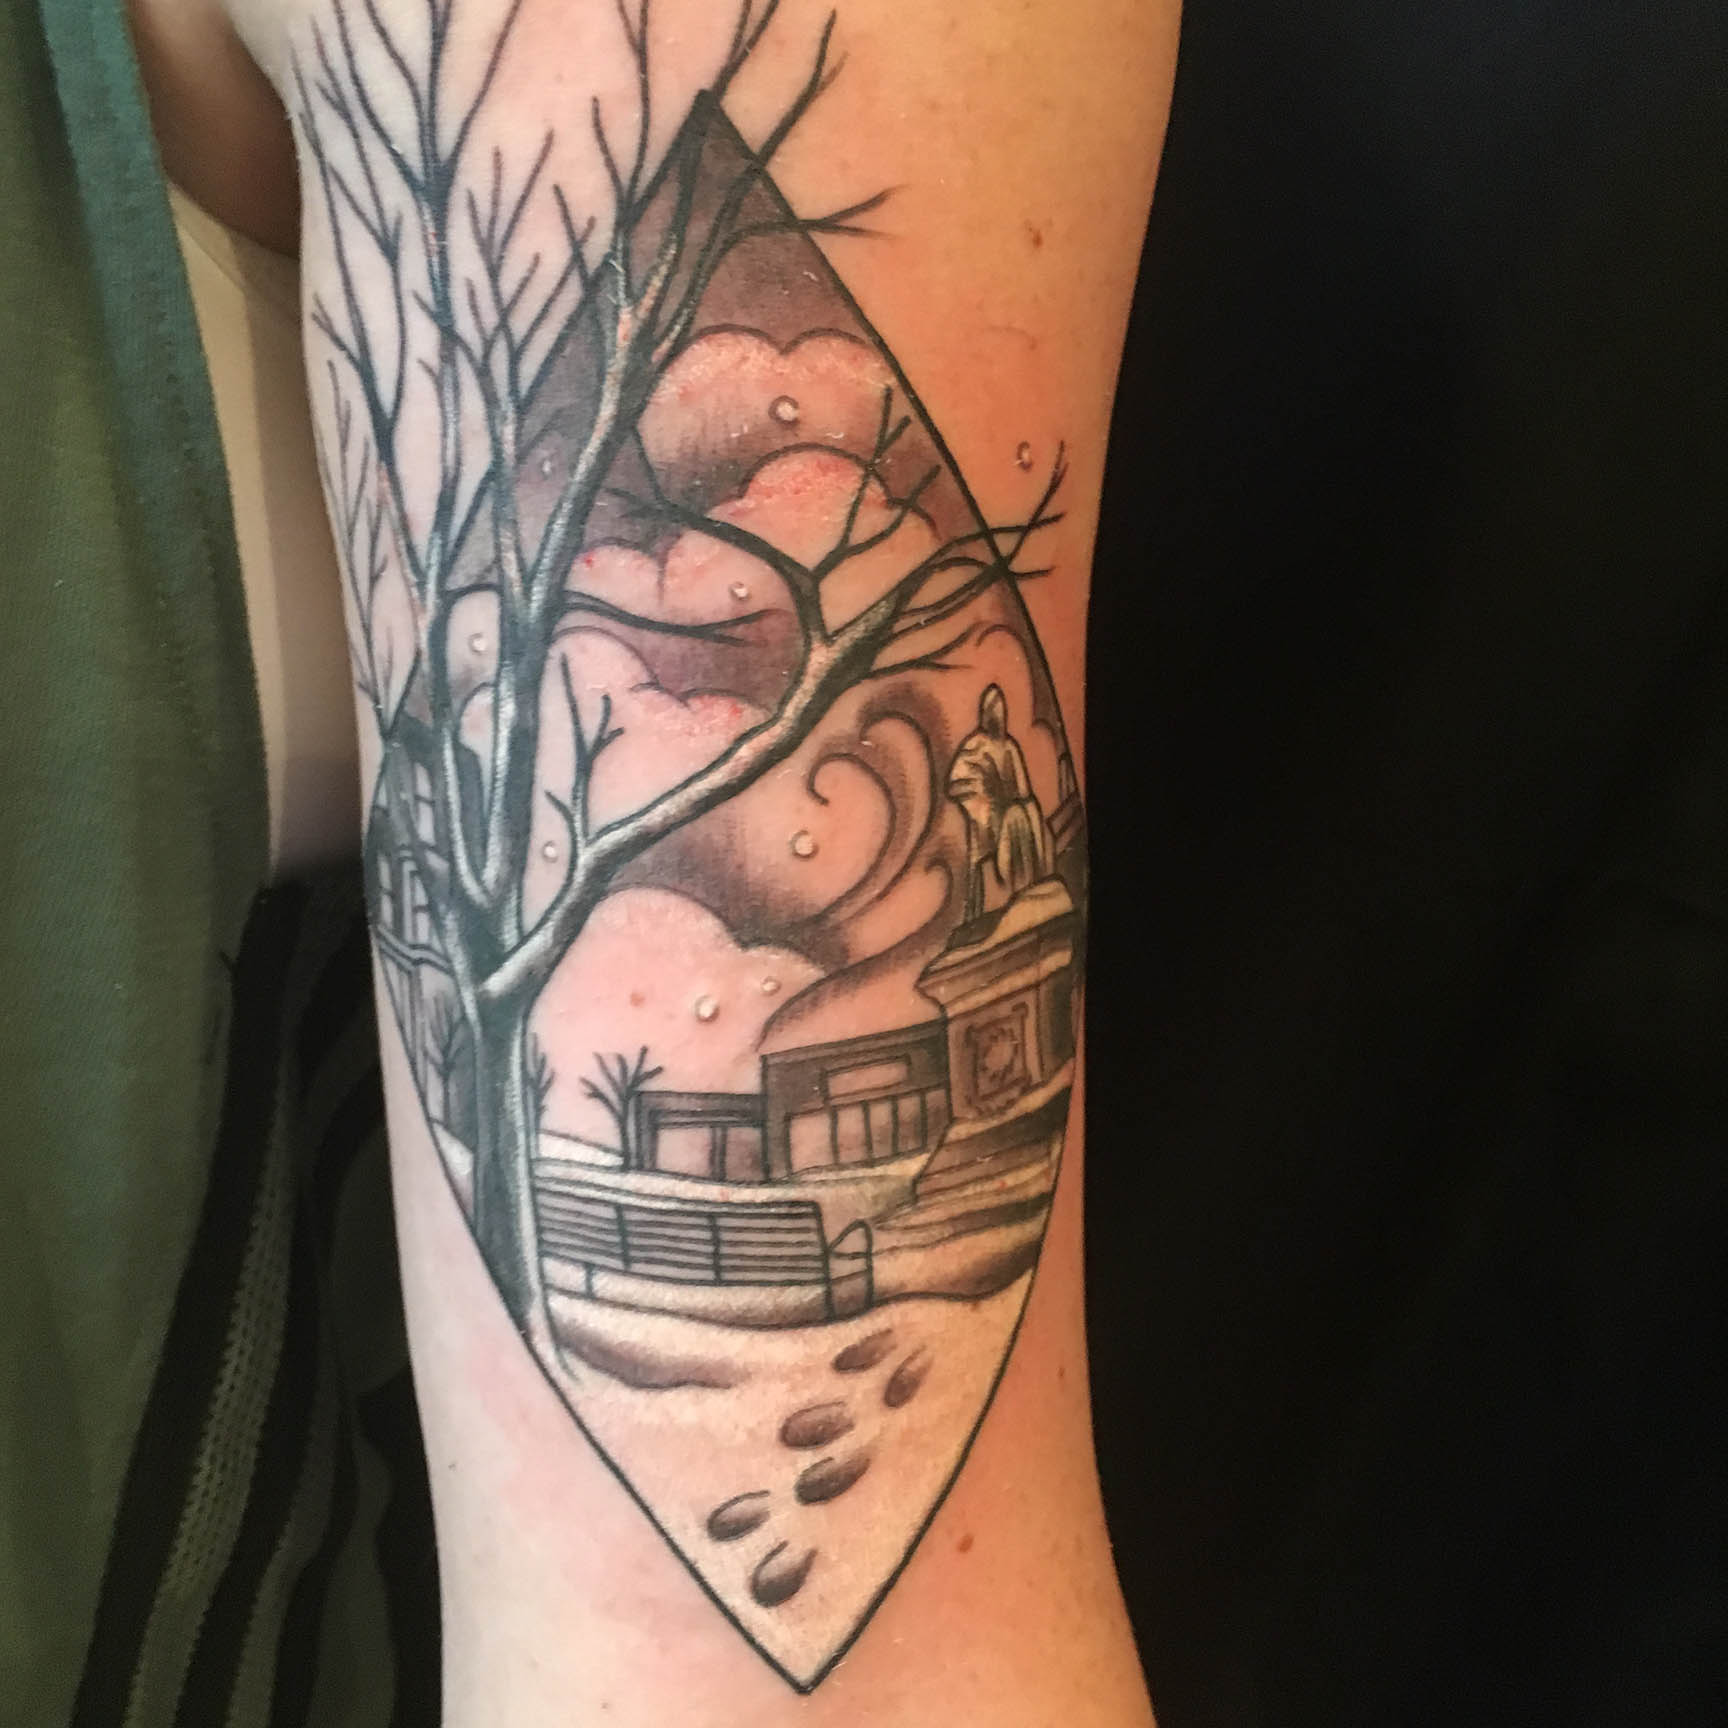 Top 188 + Tattoo shops in maine - Spcminer.com